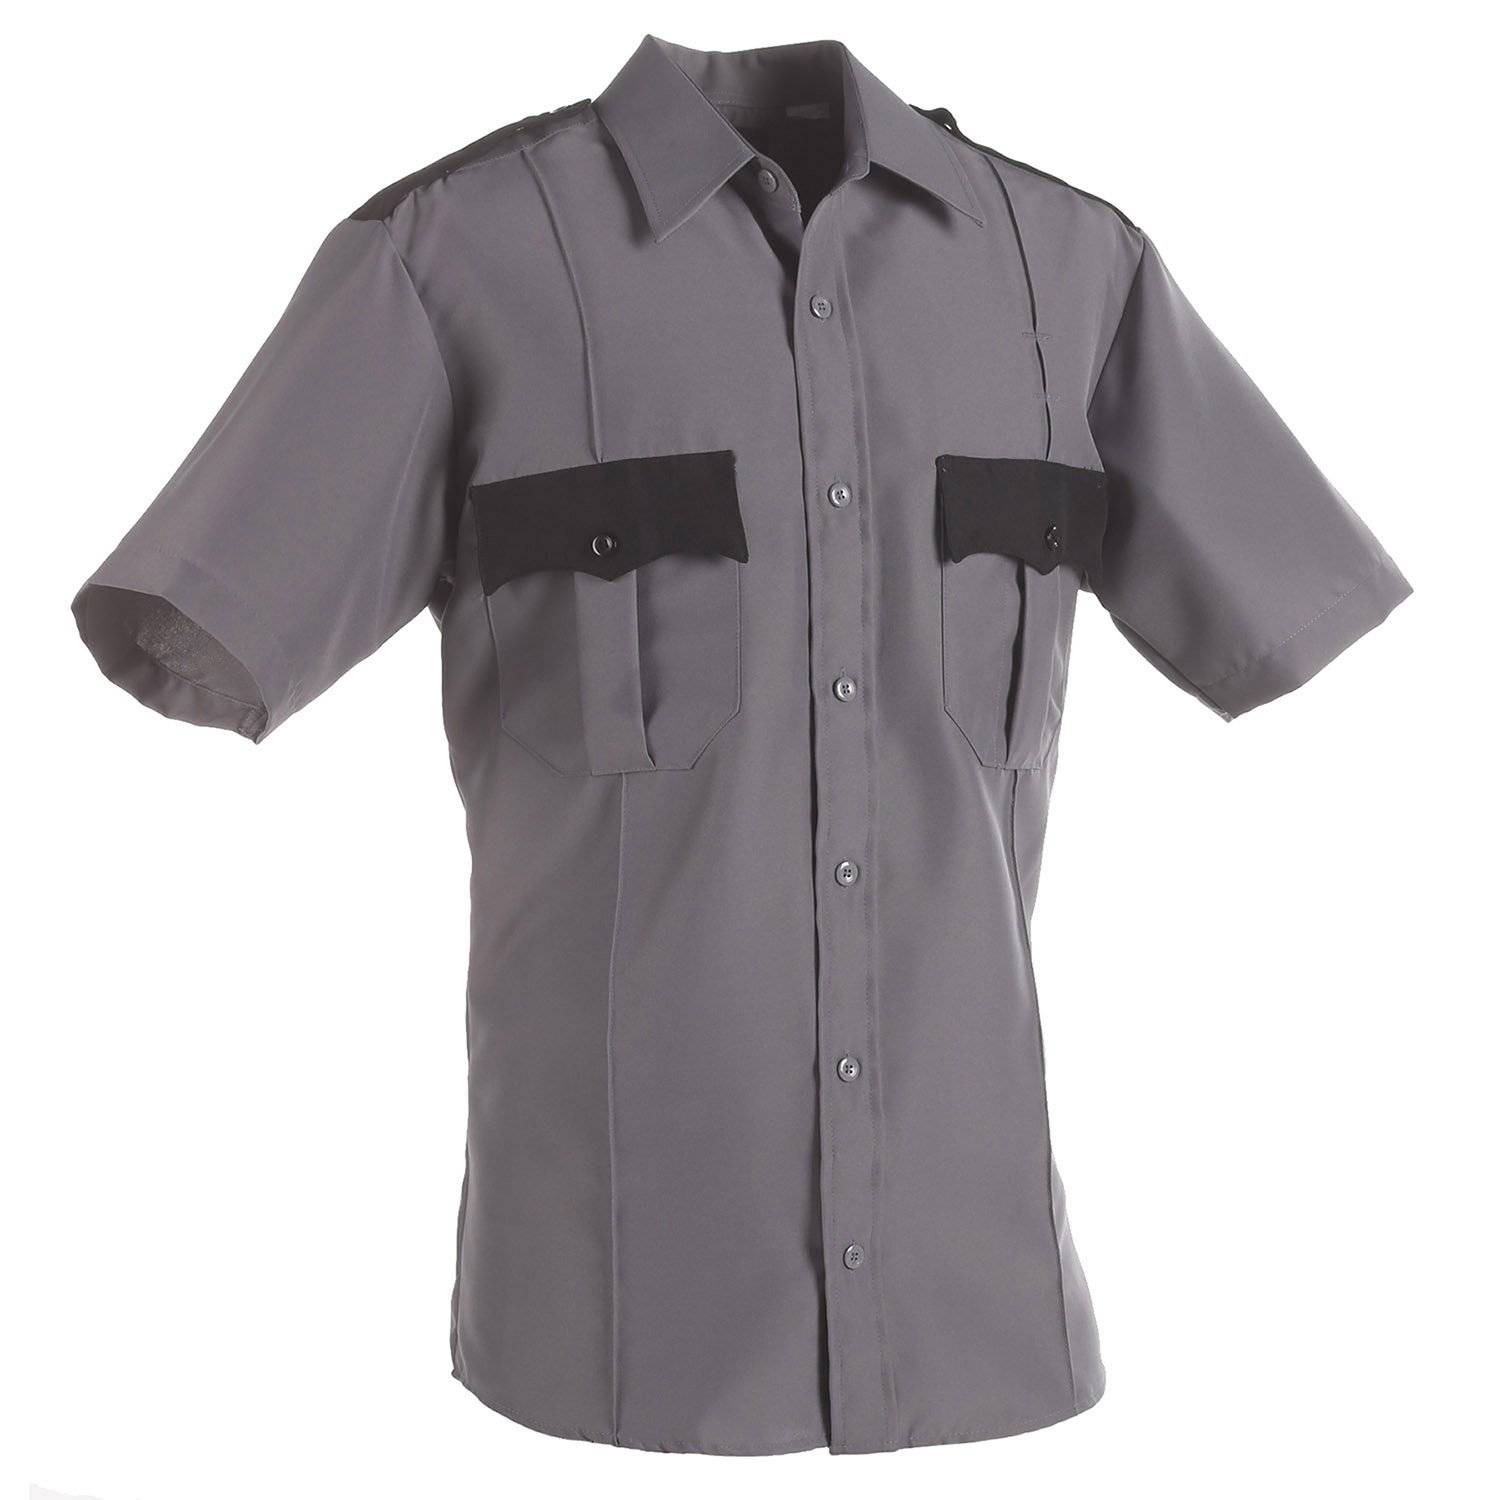 LAWPRO TWO TONE POLY COTTON SHORT SLEEVE SHIRT